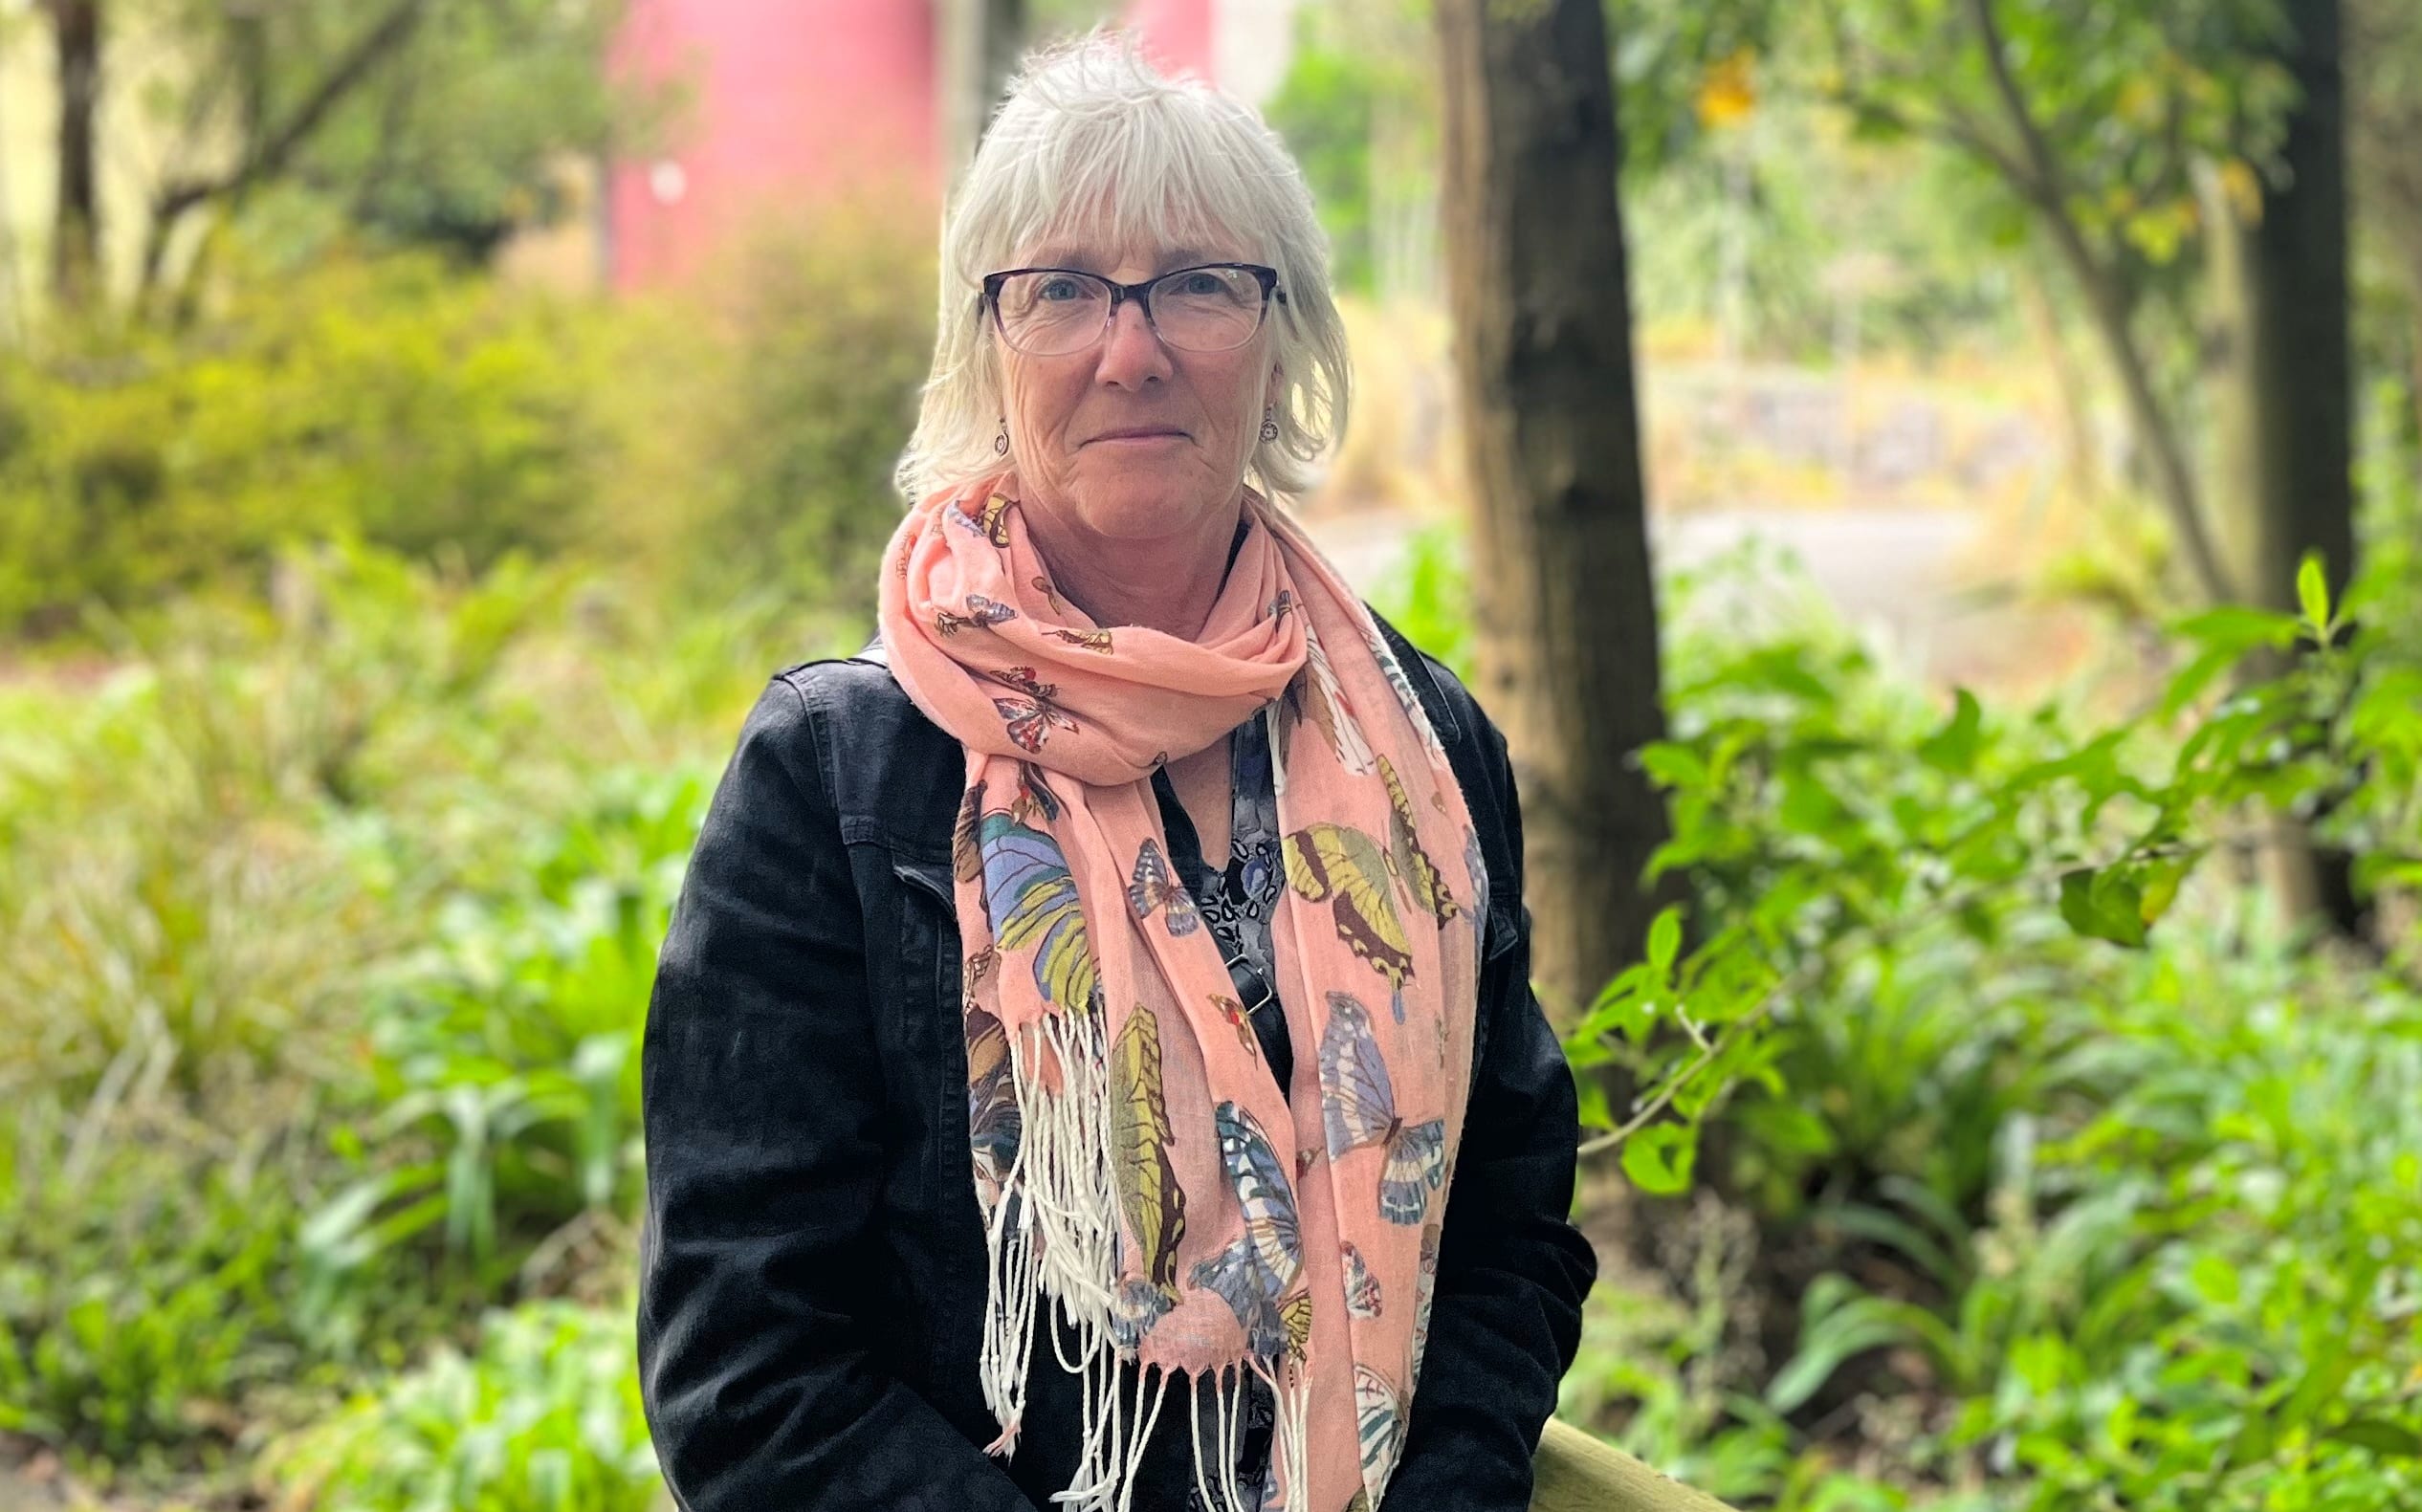 University of Canterbury Associate Professor Ruth McManus will be researching greener burial options over the next three years